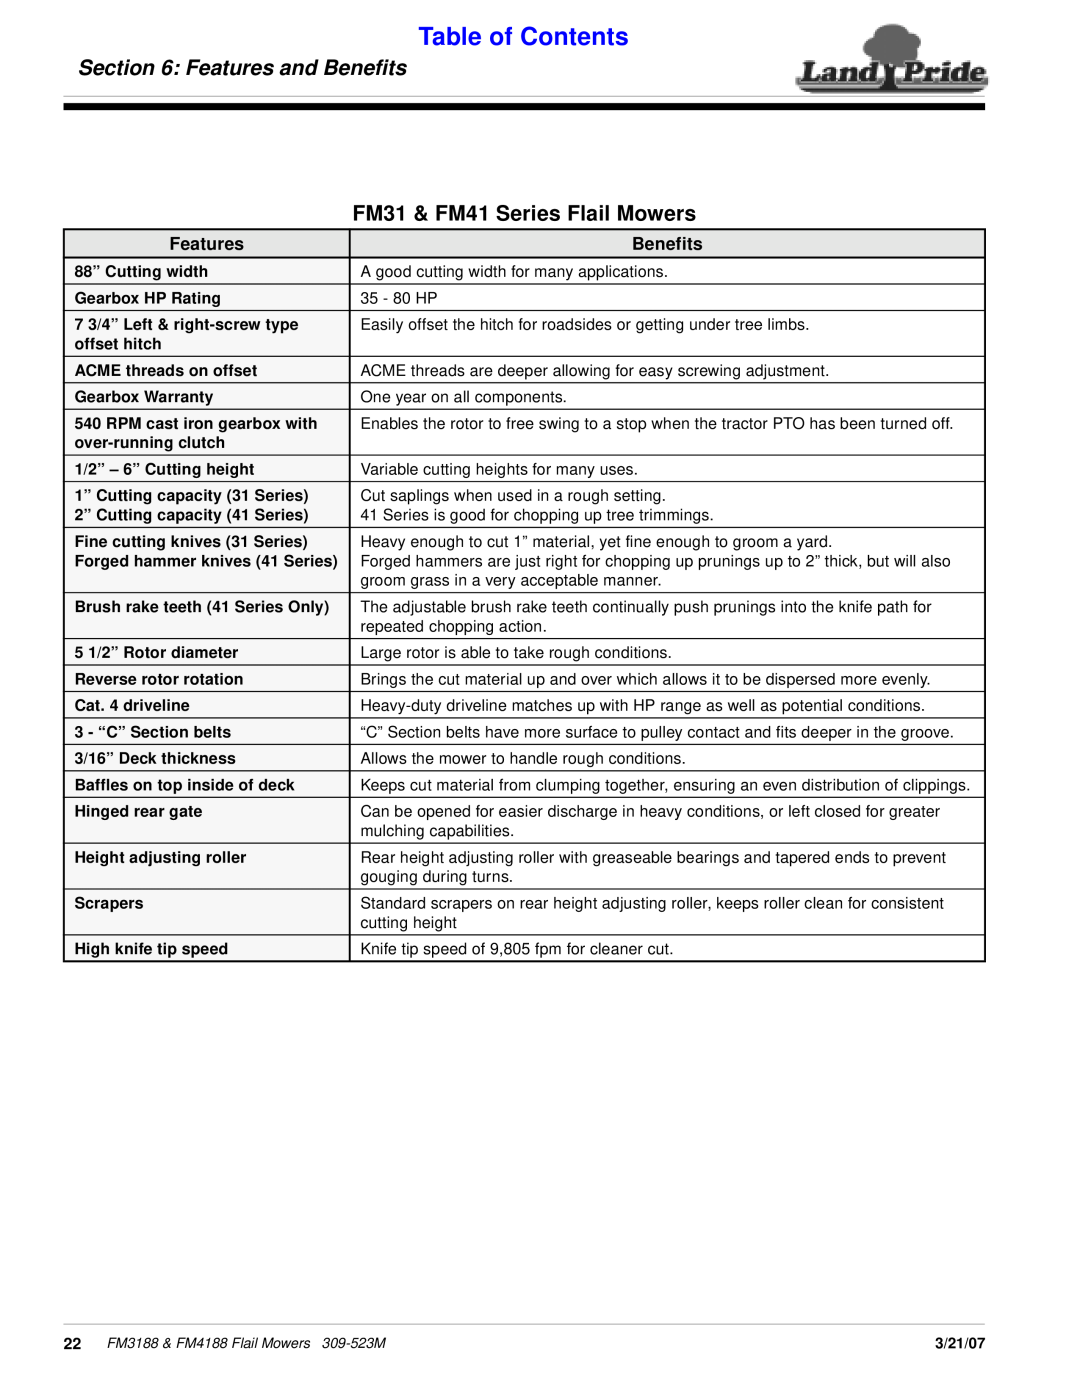 Land Pride FM4188, FM3188 manual Features and Beneﬁts, Table of Contents, Benefits 